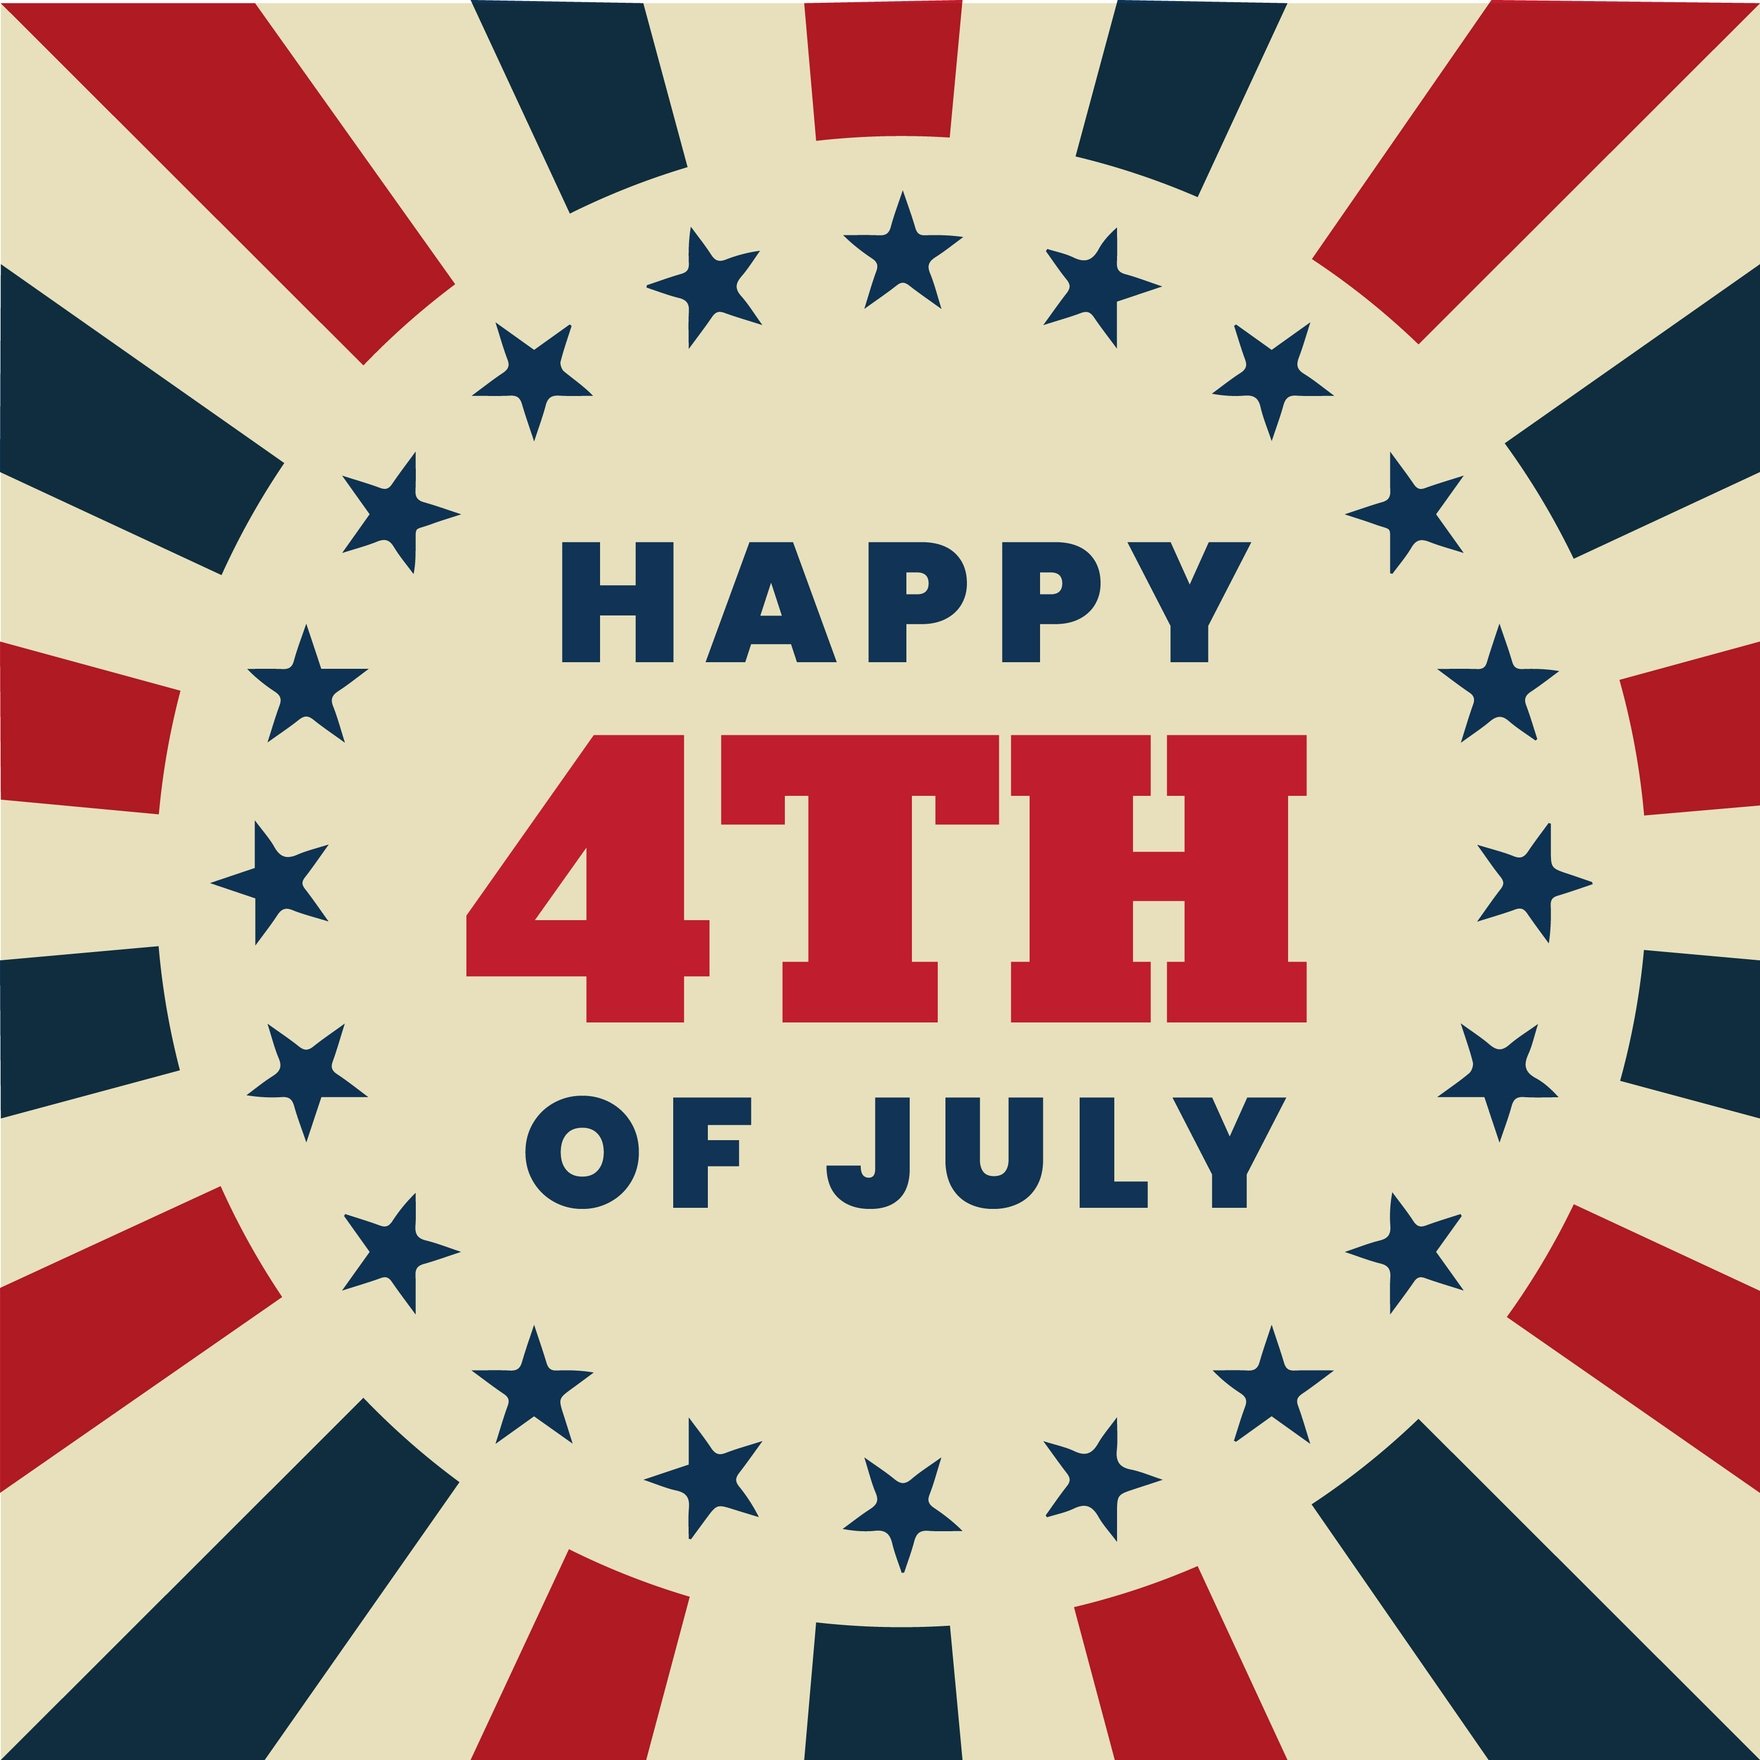 Free Retro 4th Of July Gif in Illustrator, EPS, SVG, JPG, GIF, PNG, After Effects